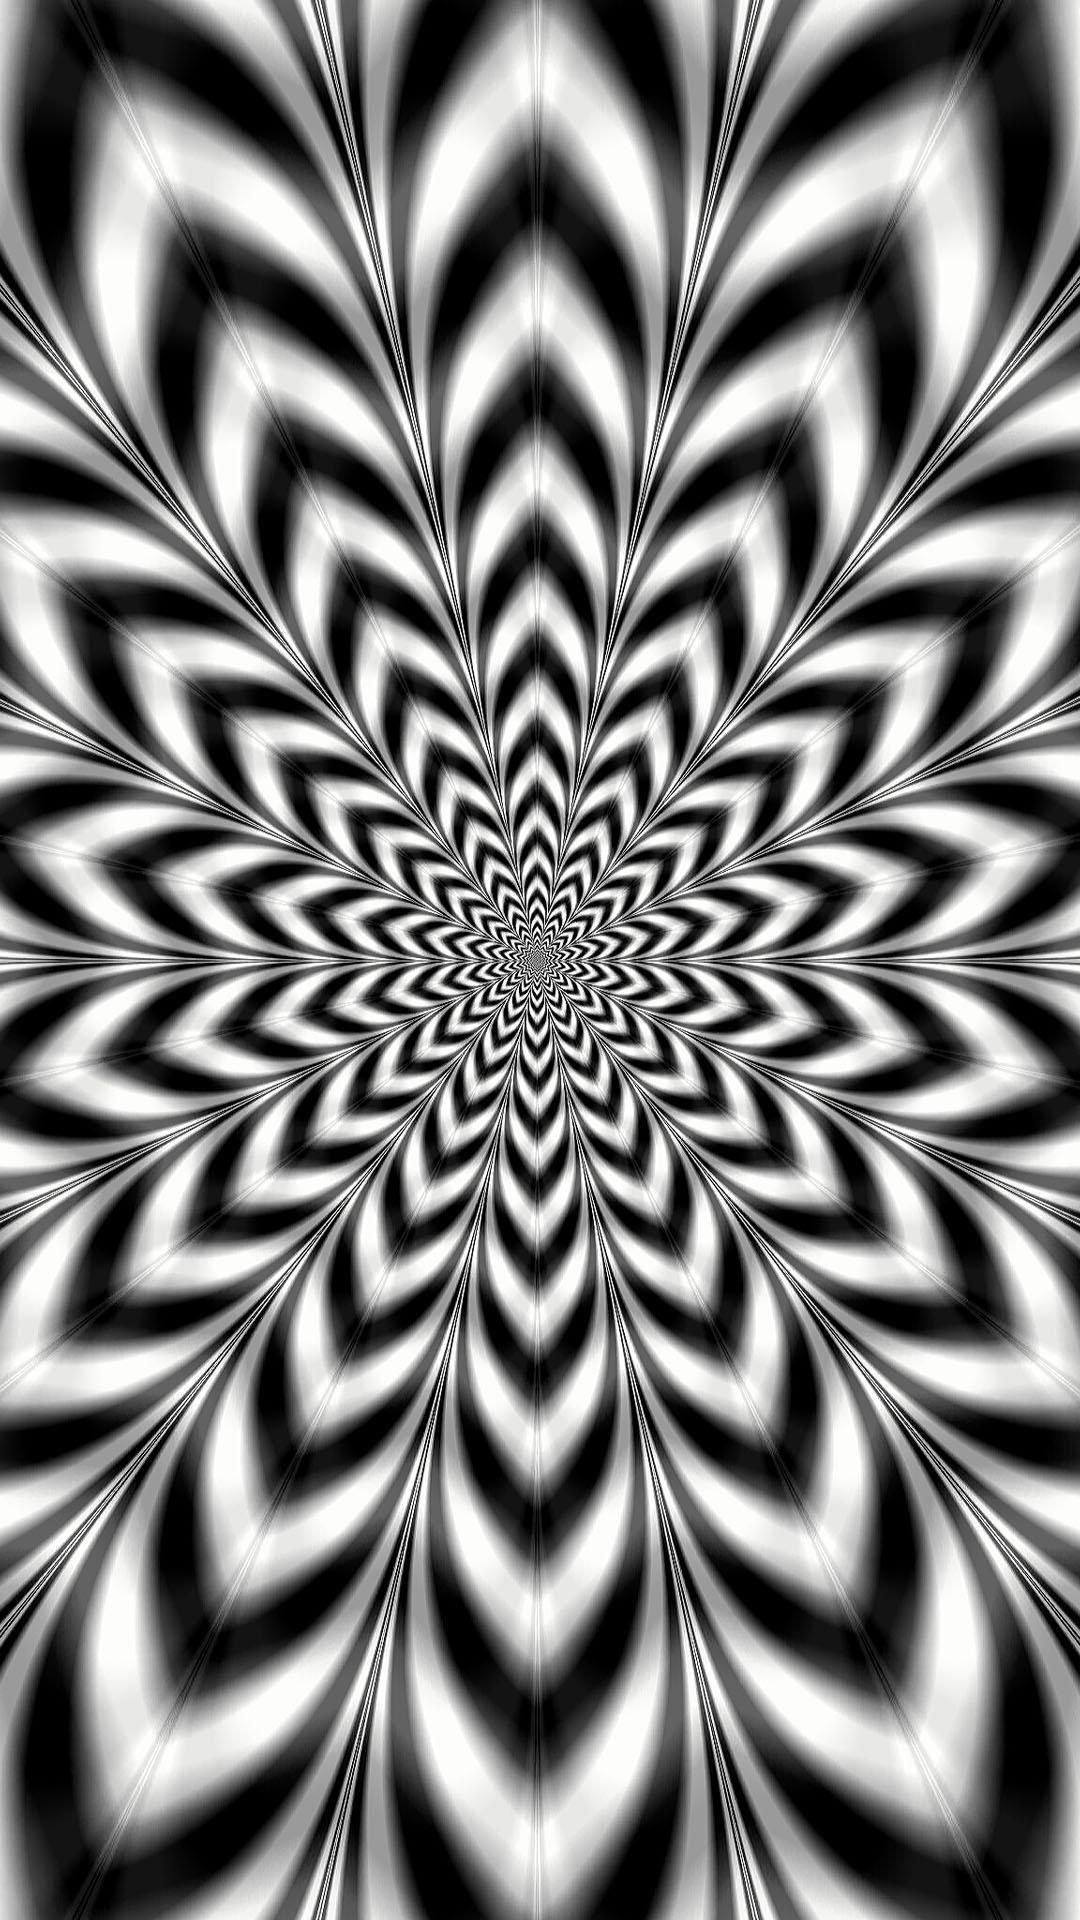 Top-Notch Black and White Optical Illusion Wallpaper for Walls | Happywall